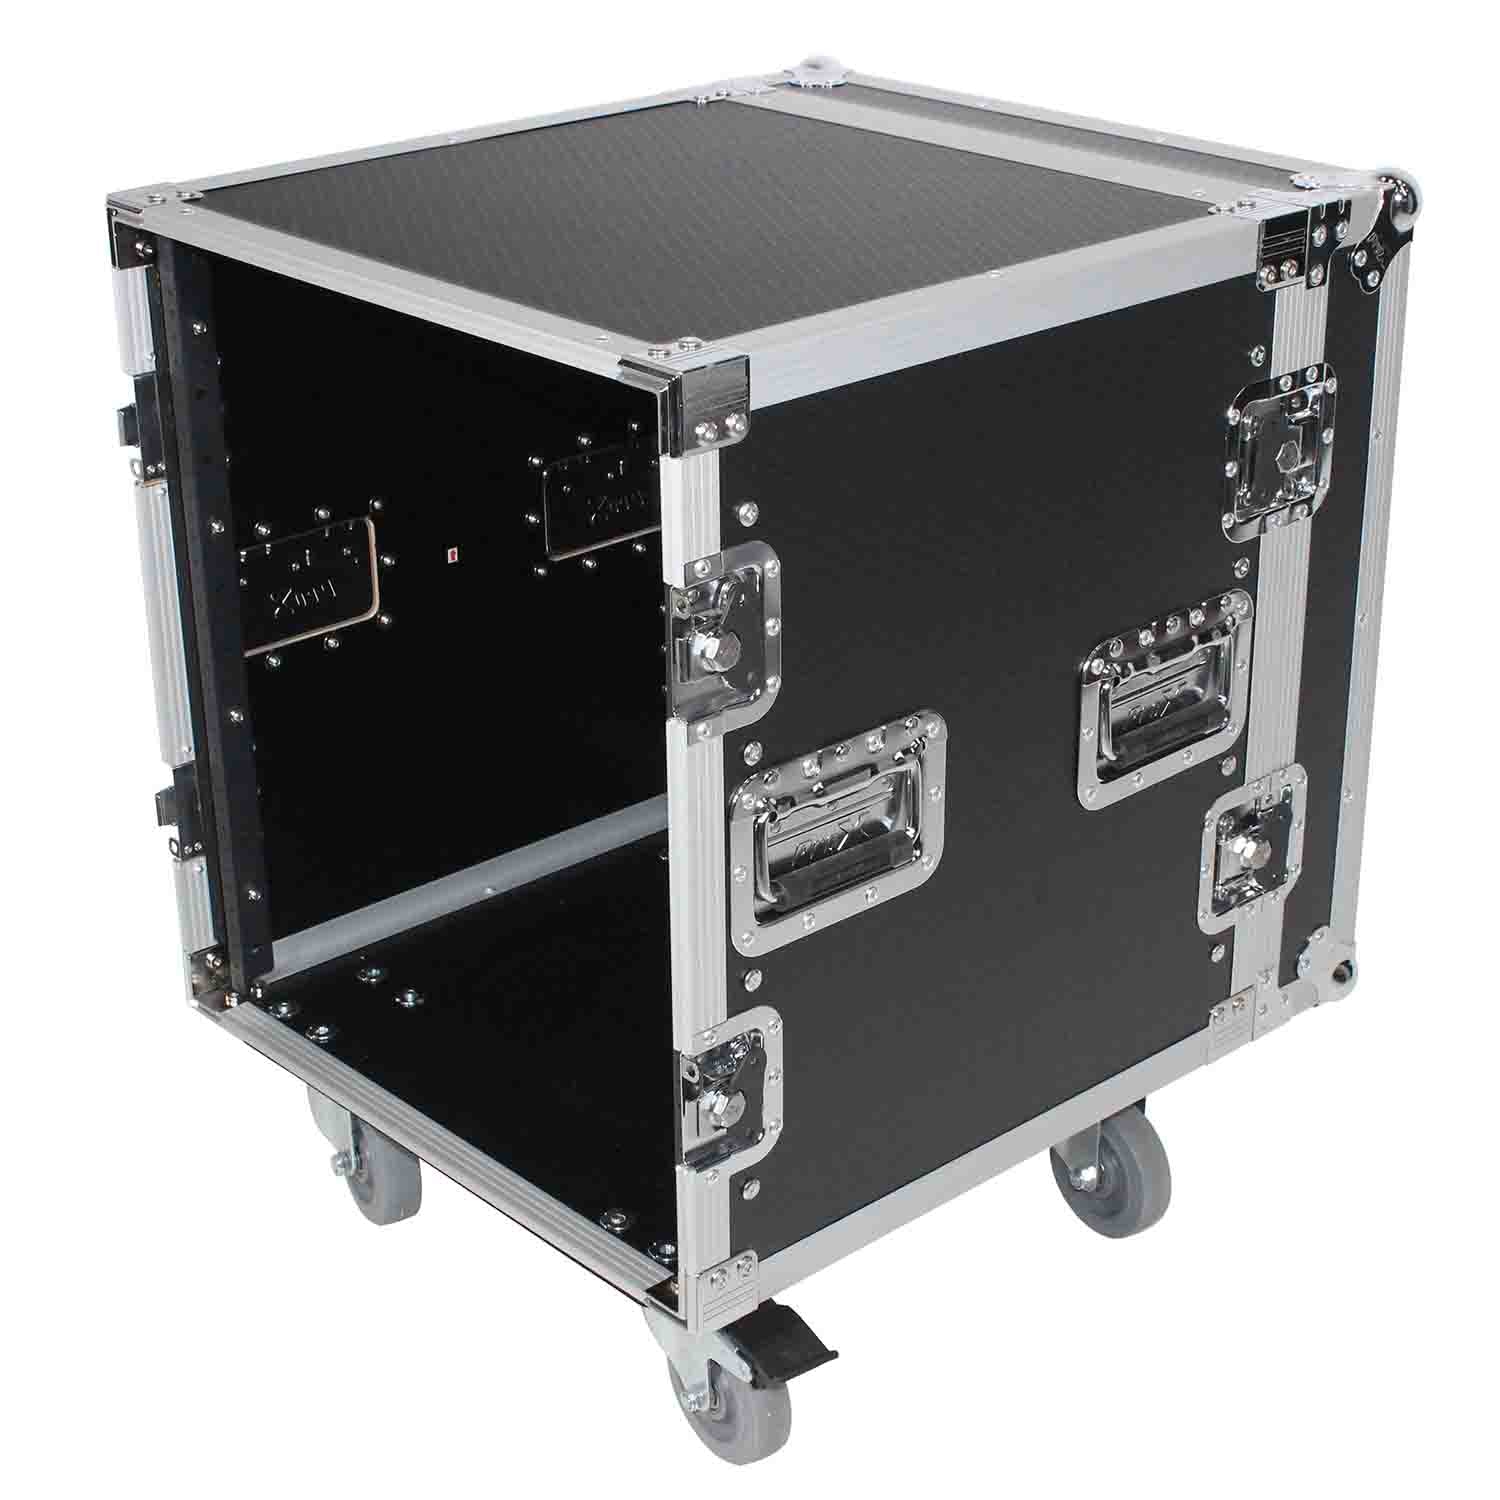 ProX XS-12R18W ,12U Space Amp Rack Mount ATA Flight Case 18 Inch Depth with Casters - Hollywood DJ